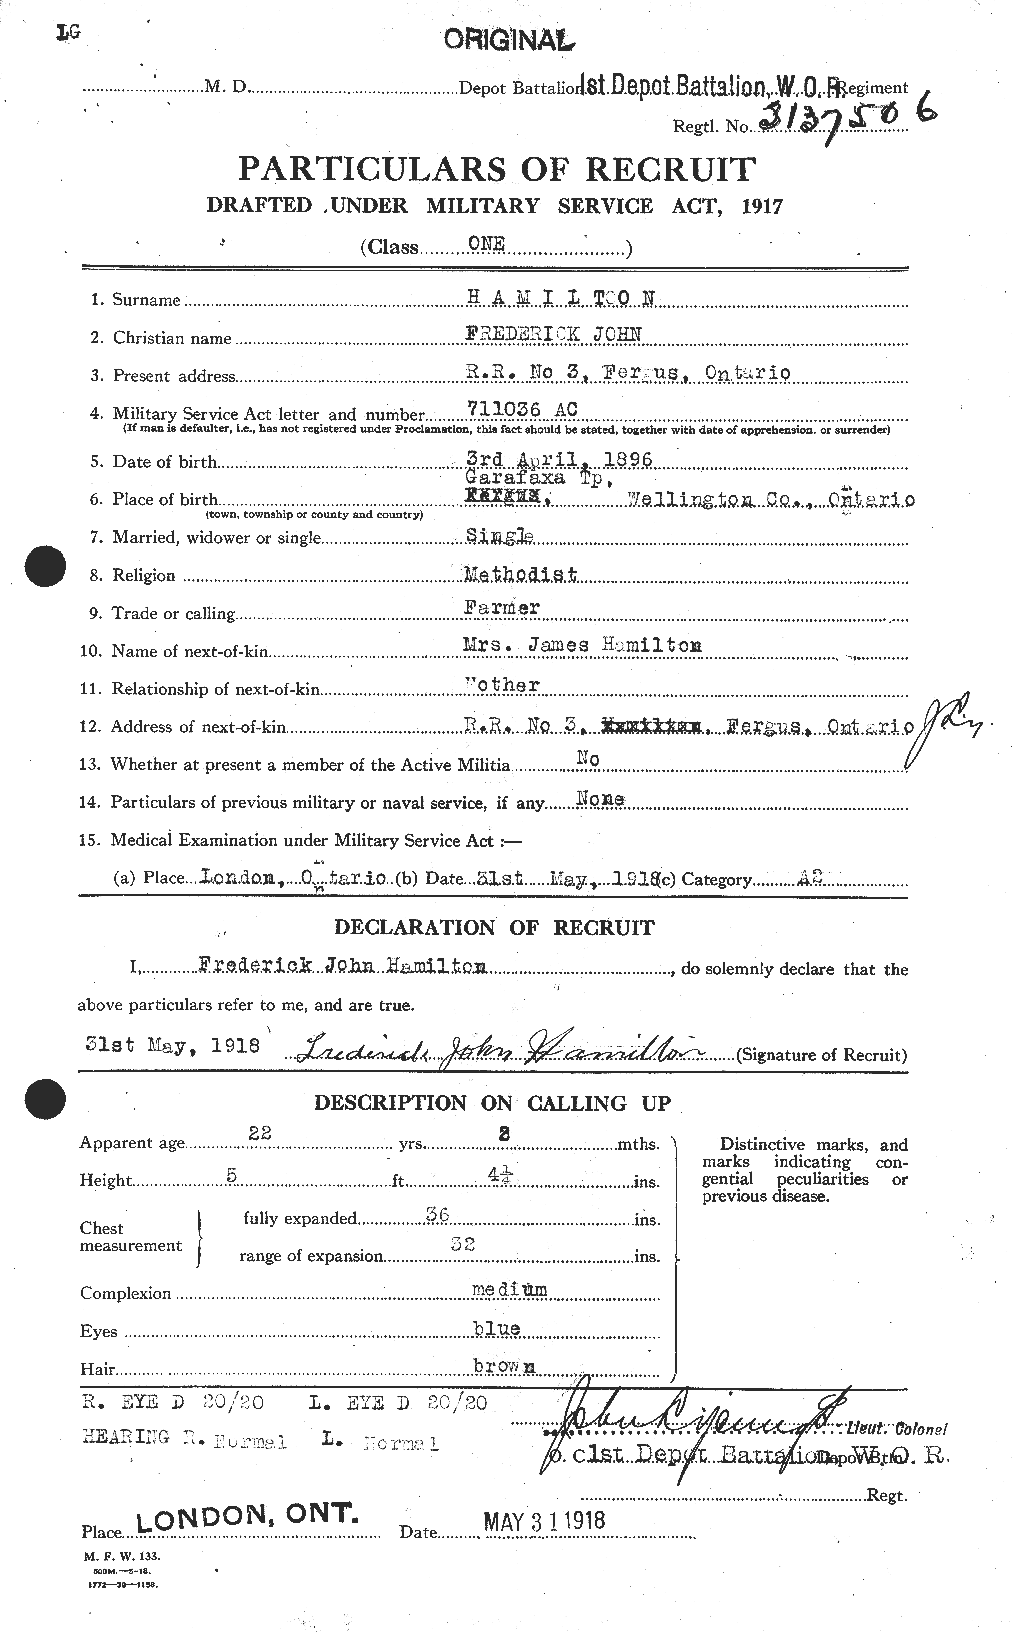 Personnel Records of the First World War - CEF 372410a